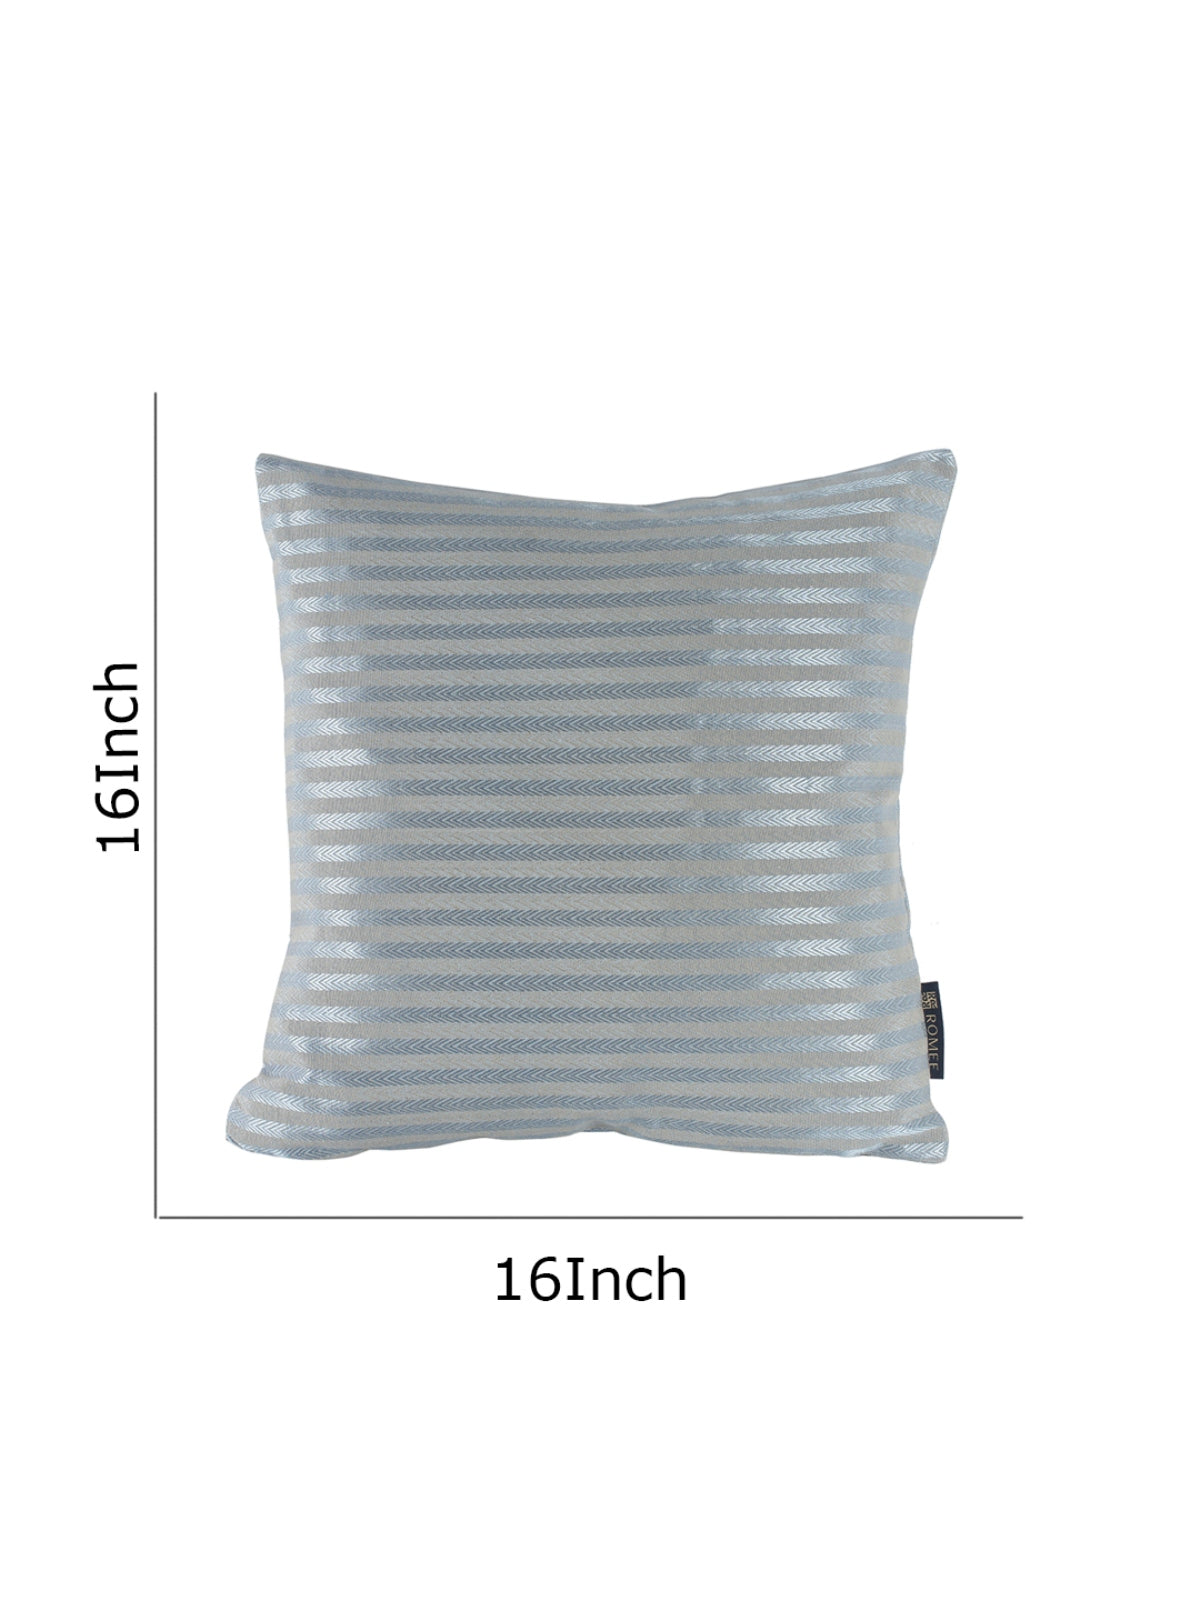 Soft Polycotton Striped Cushion Covers 16 Inch x 16 Inch, Set of 5 - Blue